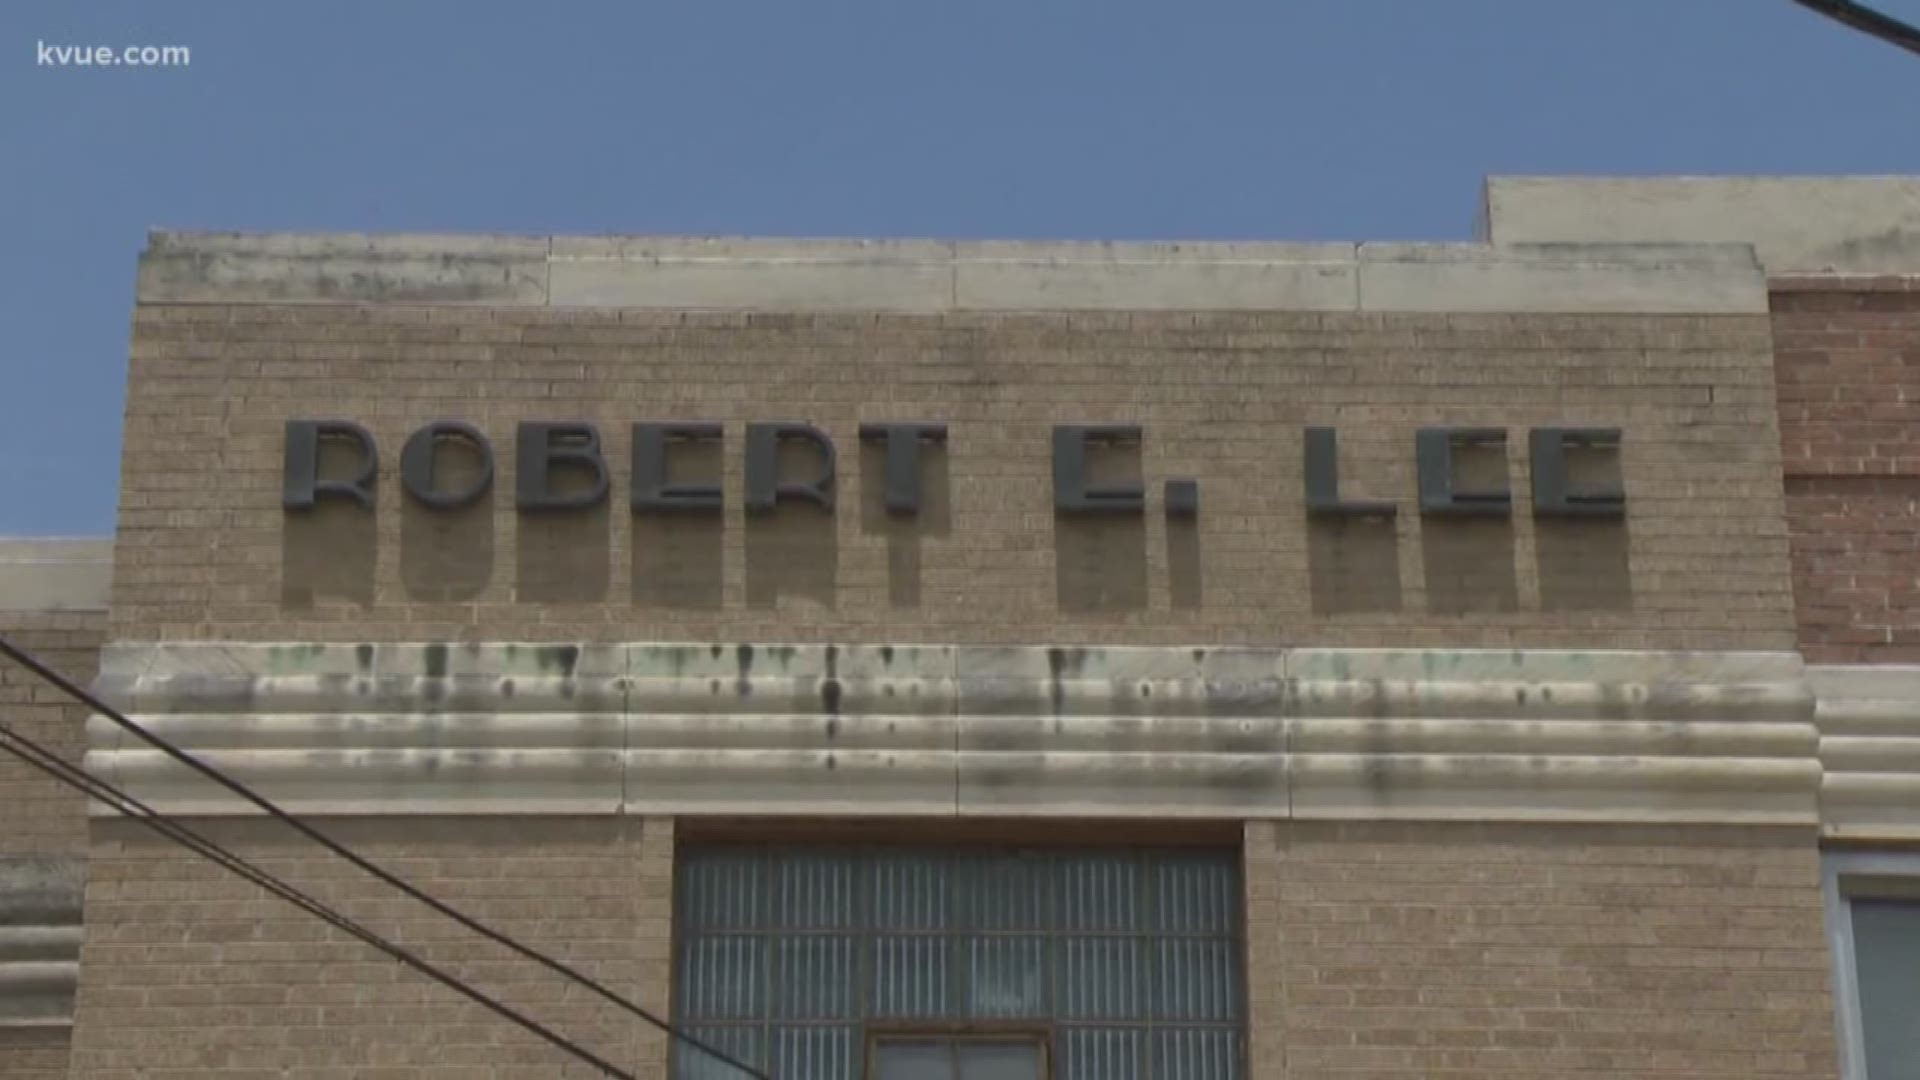 The issue? Renaming several AISD sites named after those who served in the Confederacy.